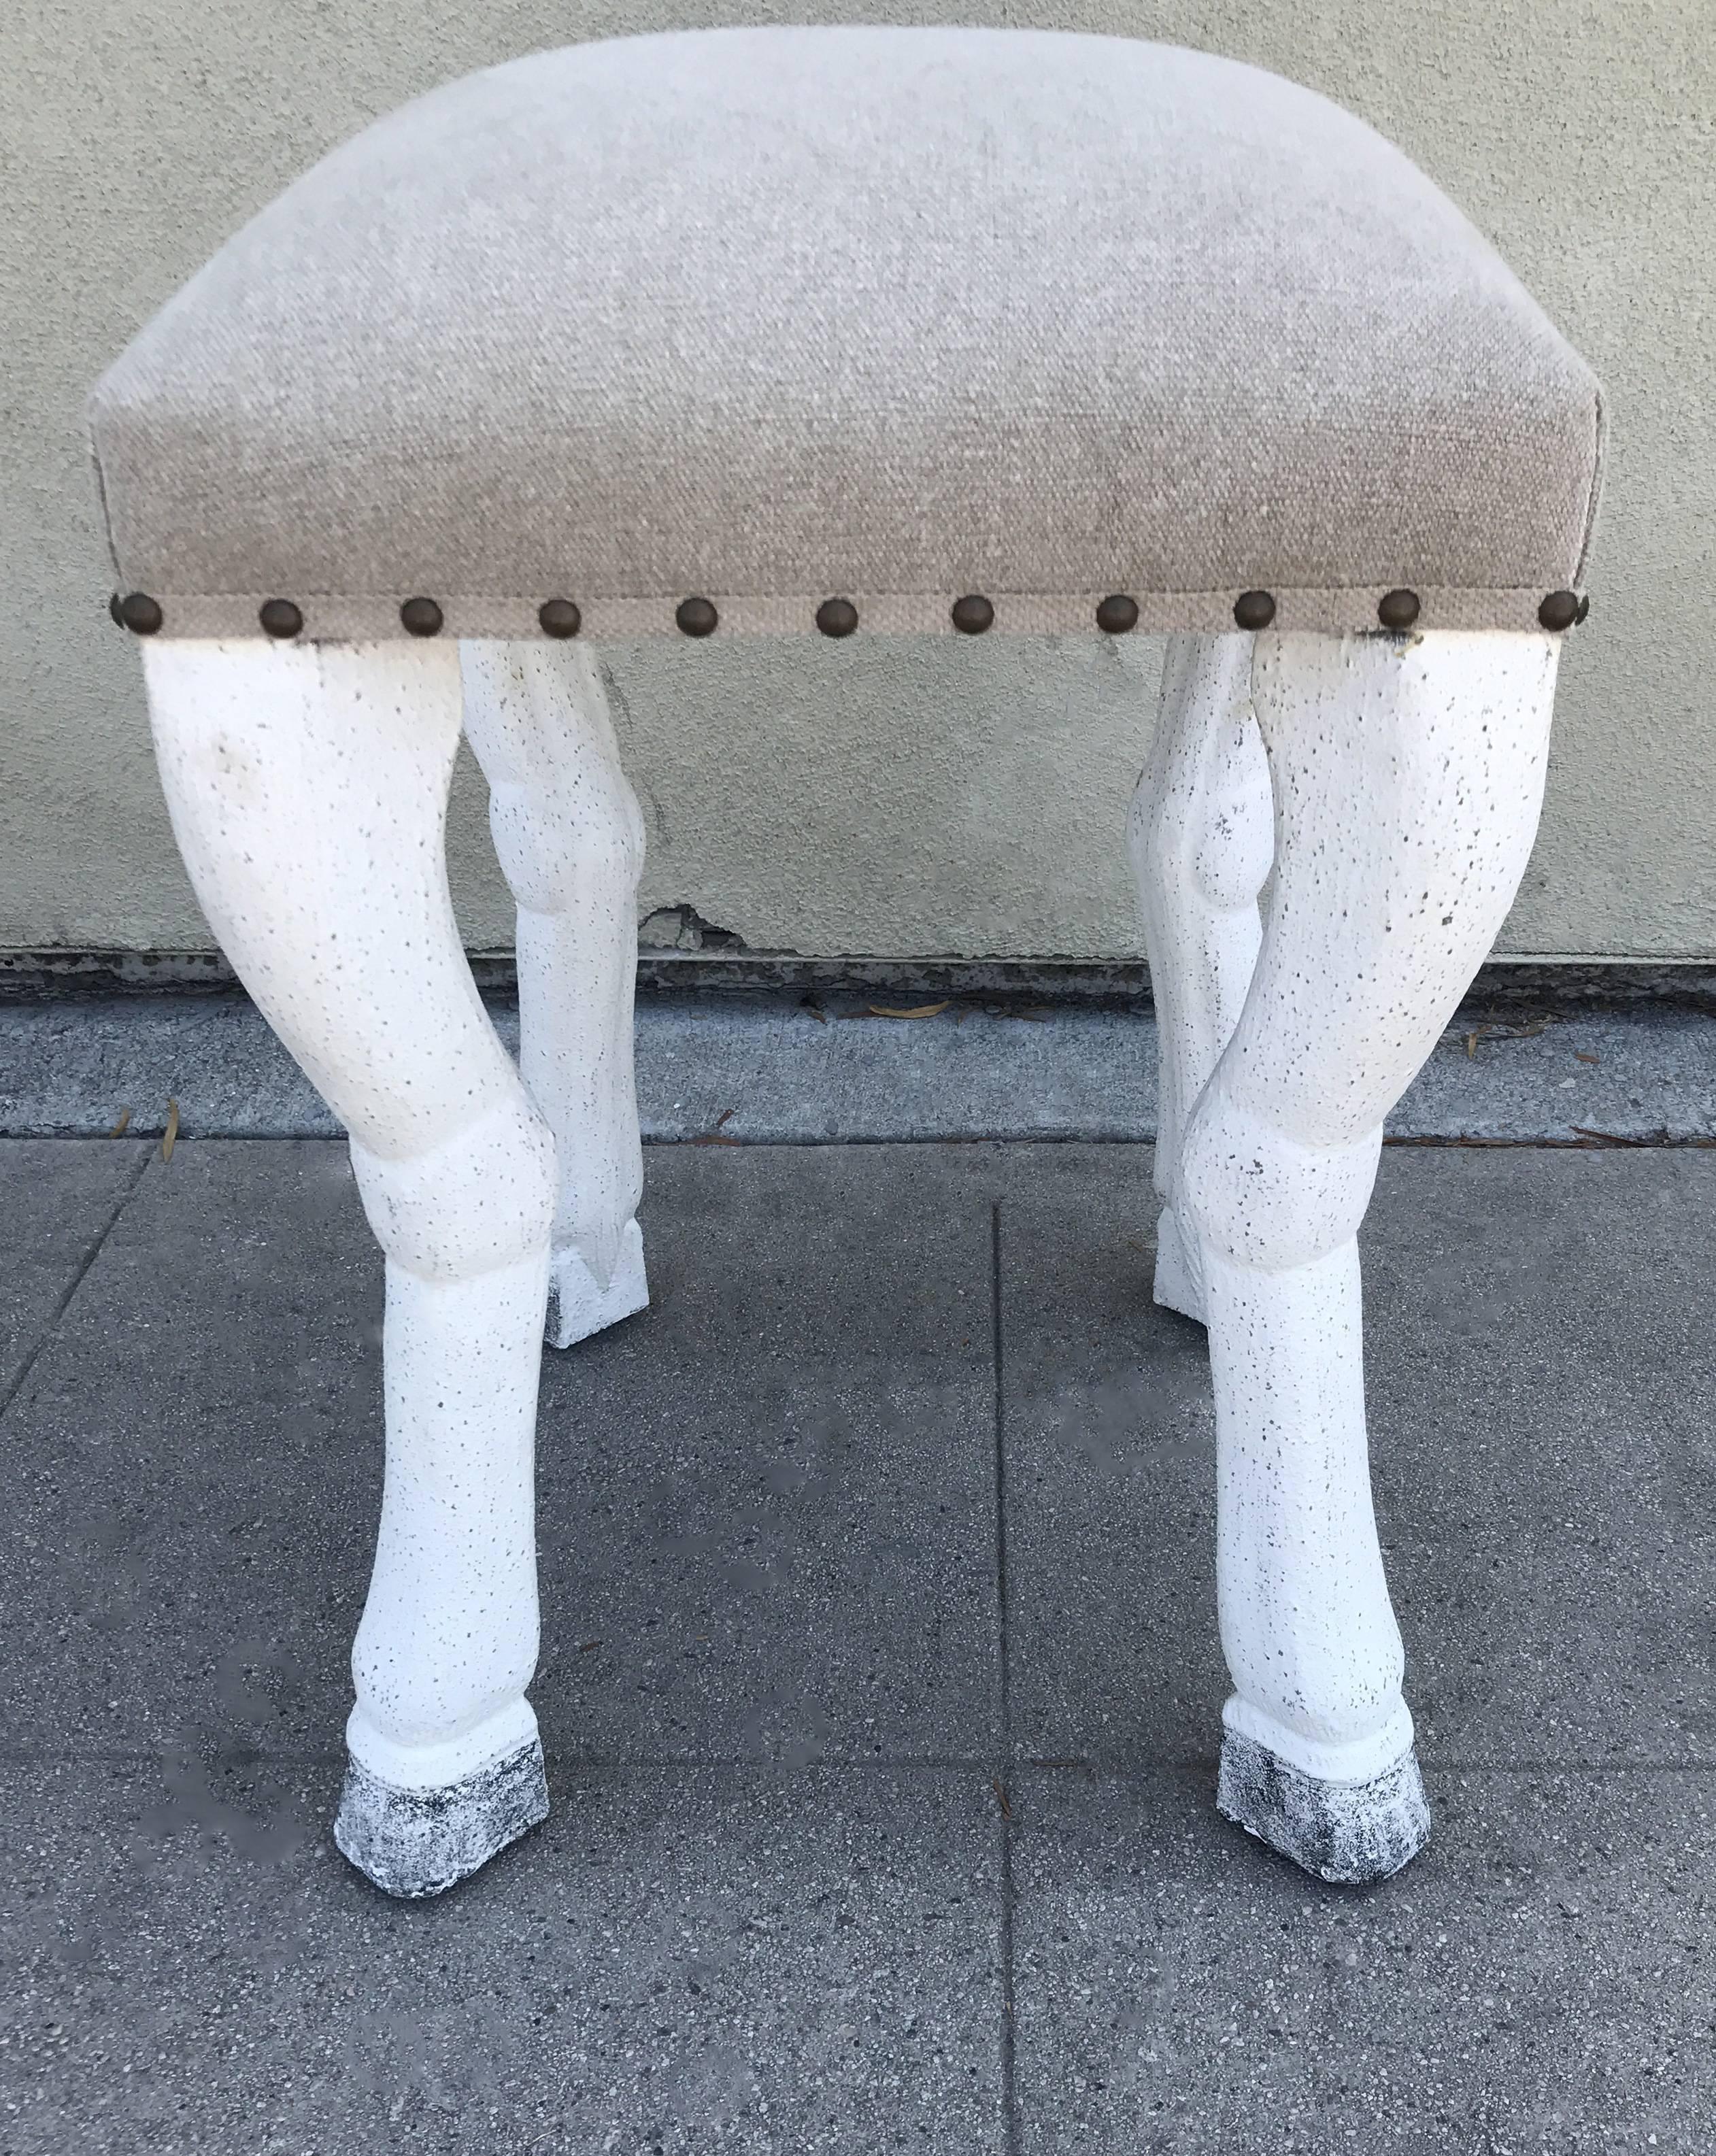 Stool upholstered in beige canvas has white washed, zoomorphic legs resembling animals hooves. Seat itself measures 16.0" x 16.0".